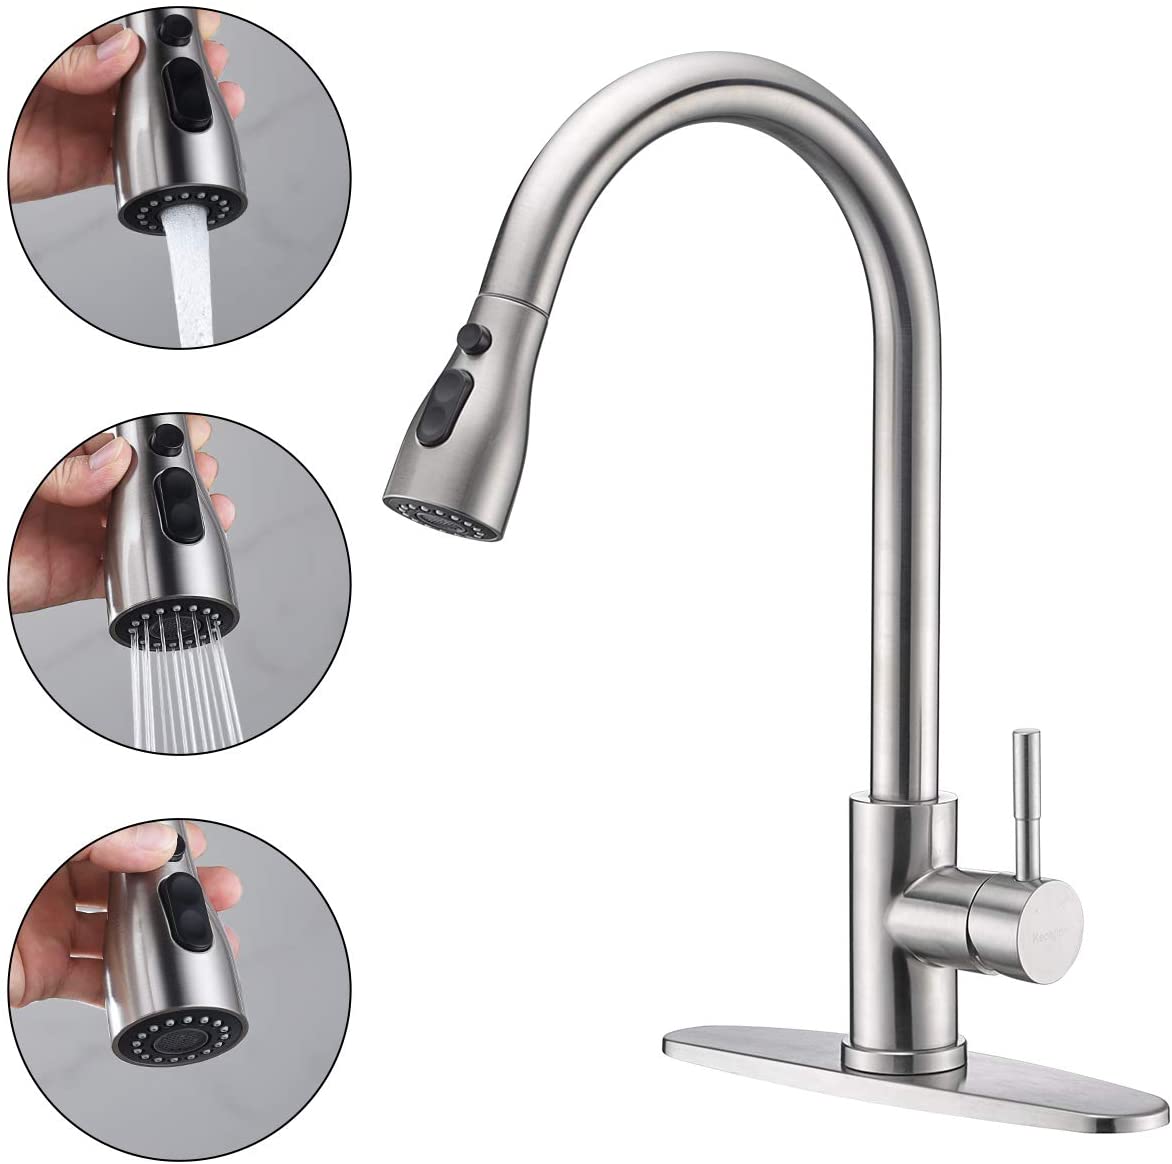 Stainless Steel Kitchen Faucets, High Arc Single Handle Pull out Brushed Nicke, Single Level with Pull down Sprayer - Venetio